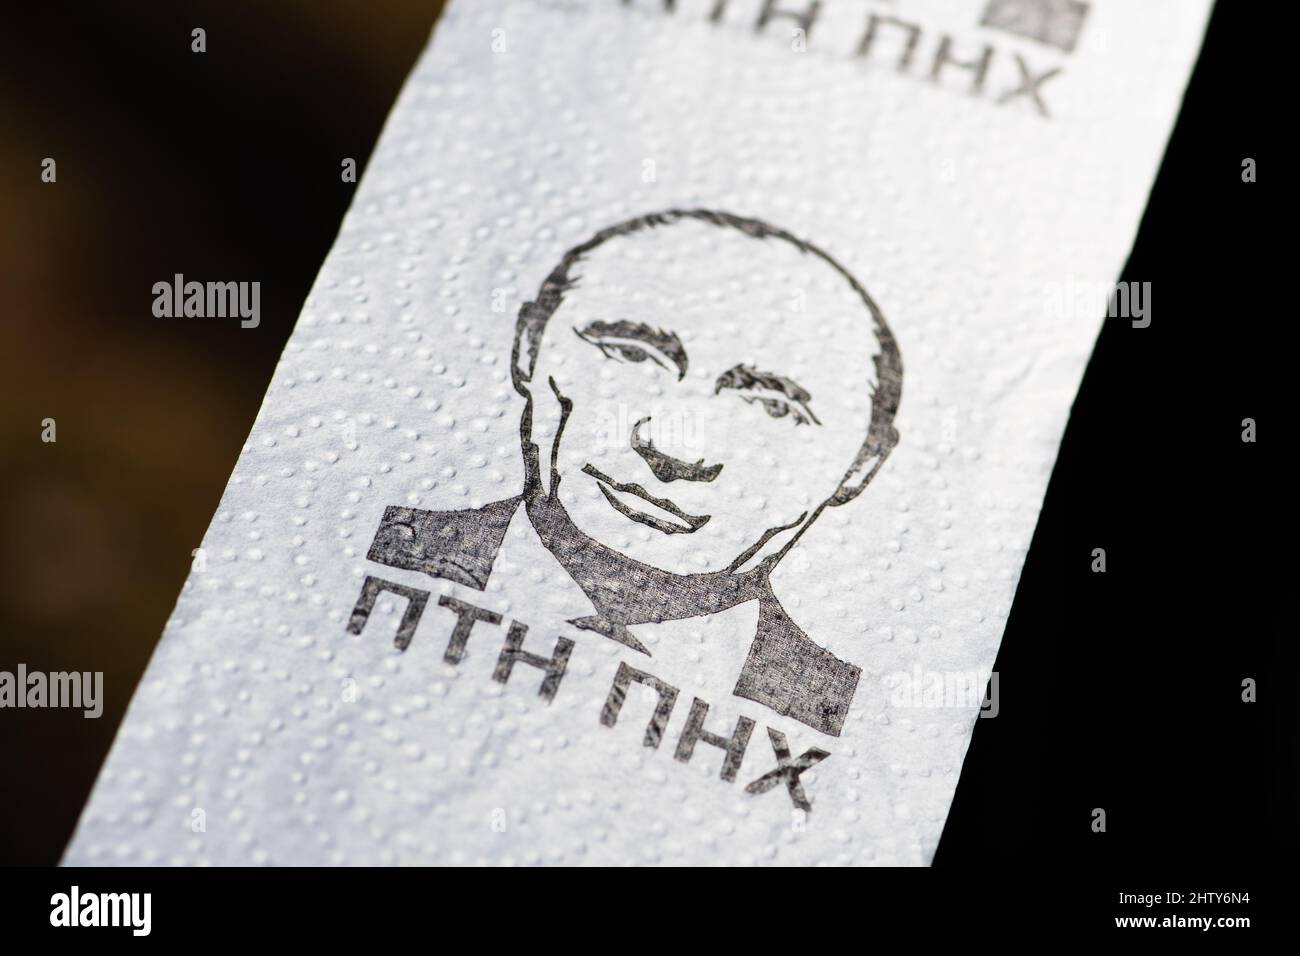 Peaceful demonstration against war, Putin and Russia in support of Ukraine with Putin on toilet paper Stock Photo